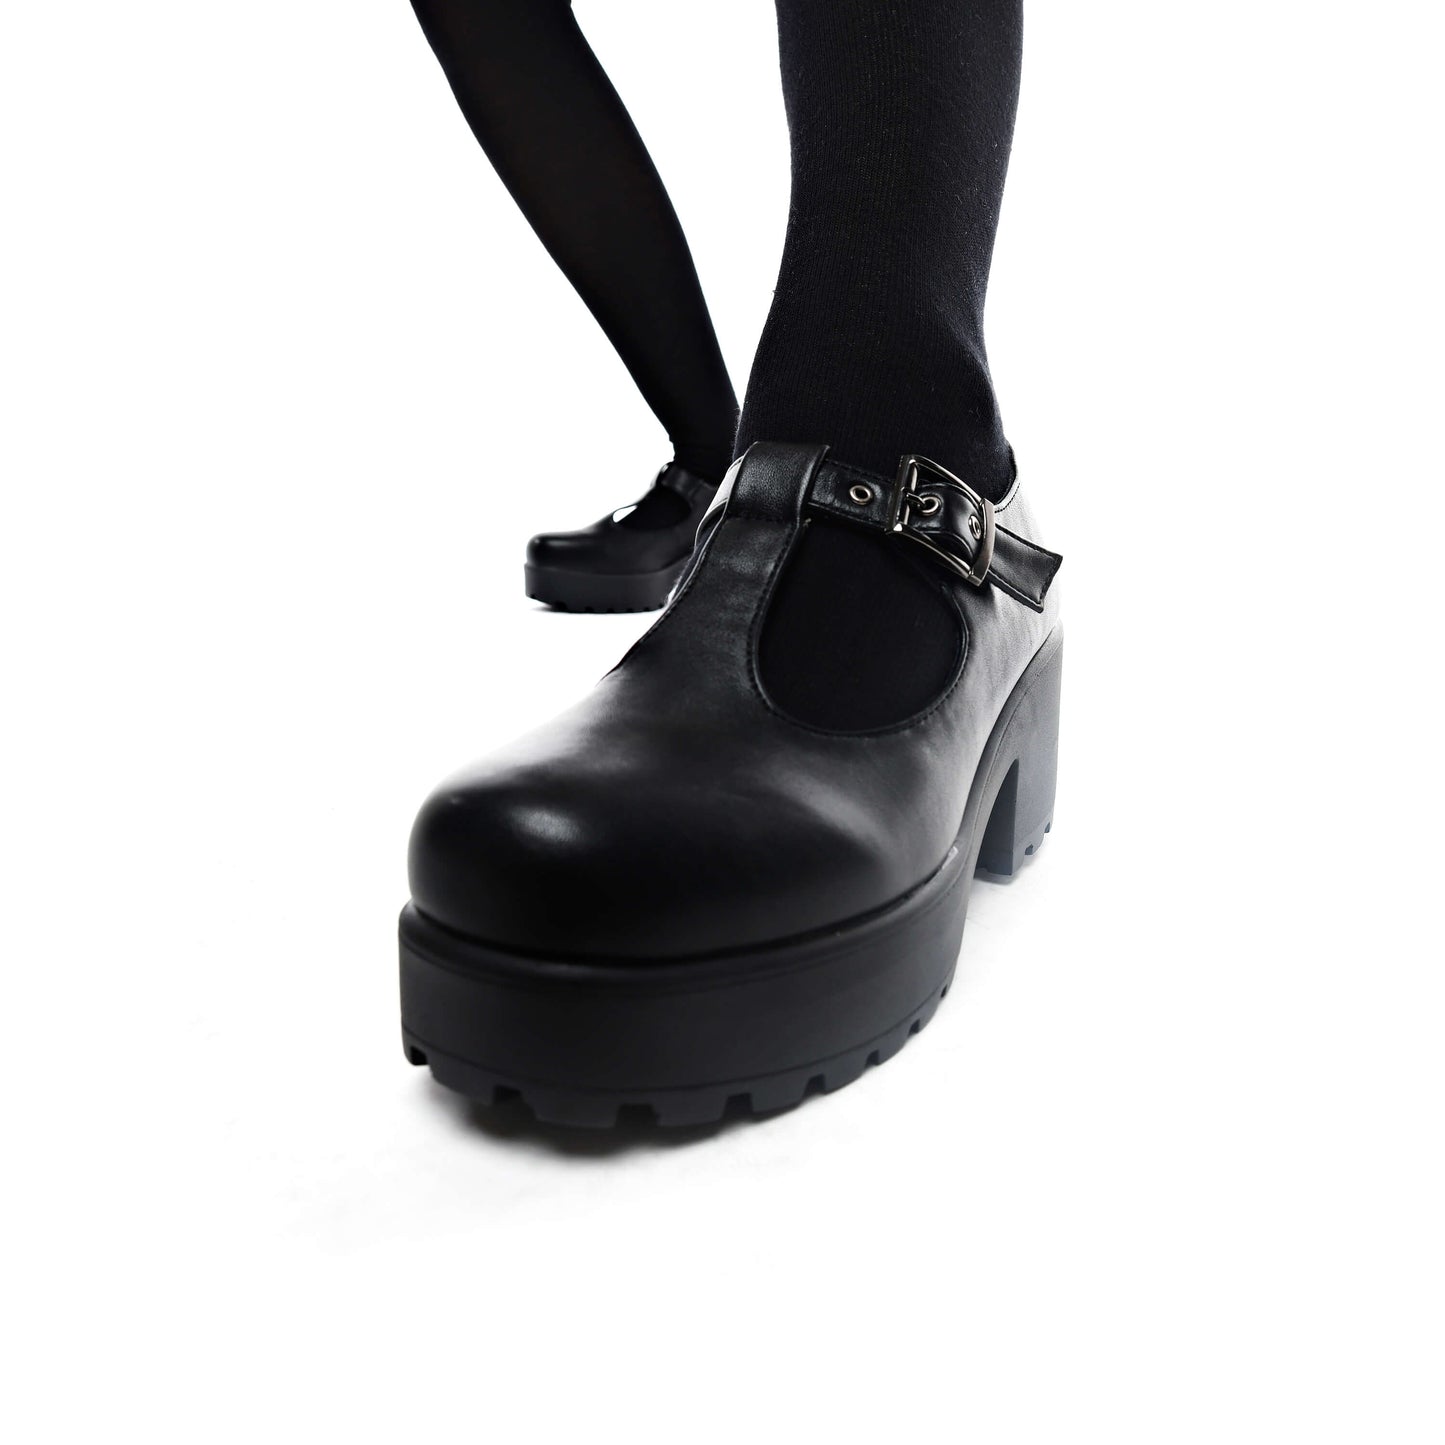 SAI Black Mary Jane Shoes 'Faux Leather Edition' - Mary Janes - KOI Footwear - Black - Model Front Detail